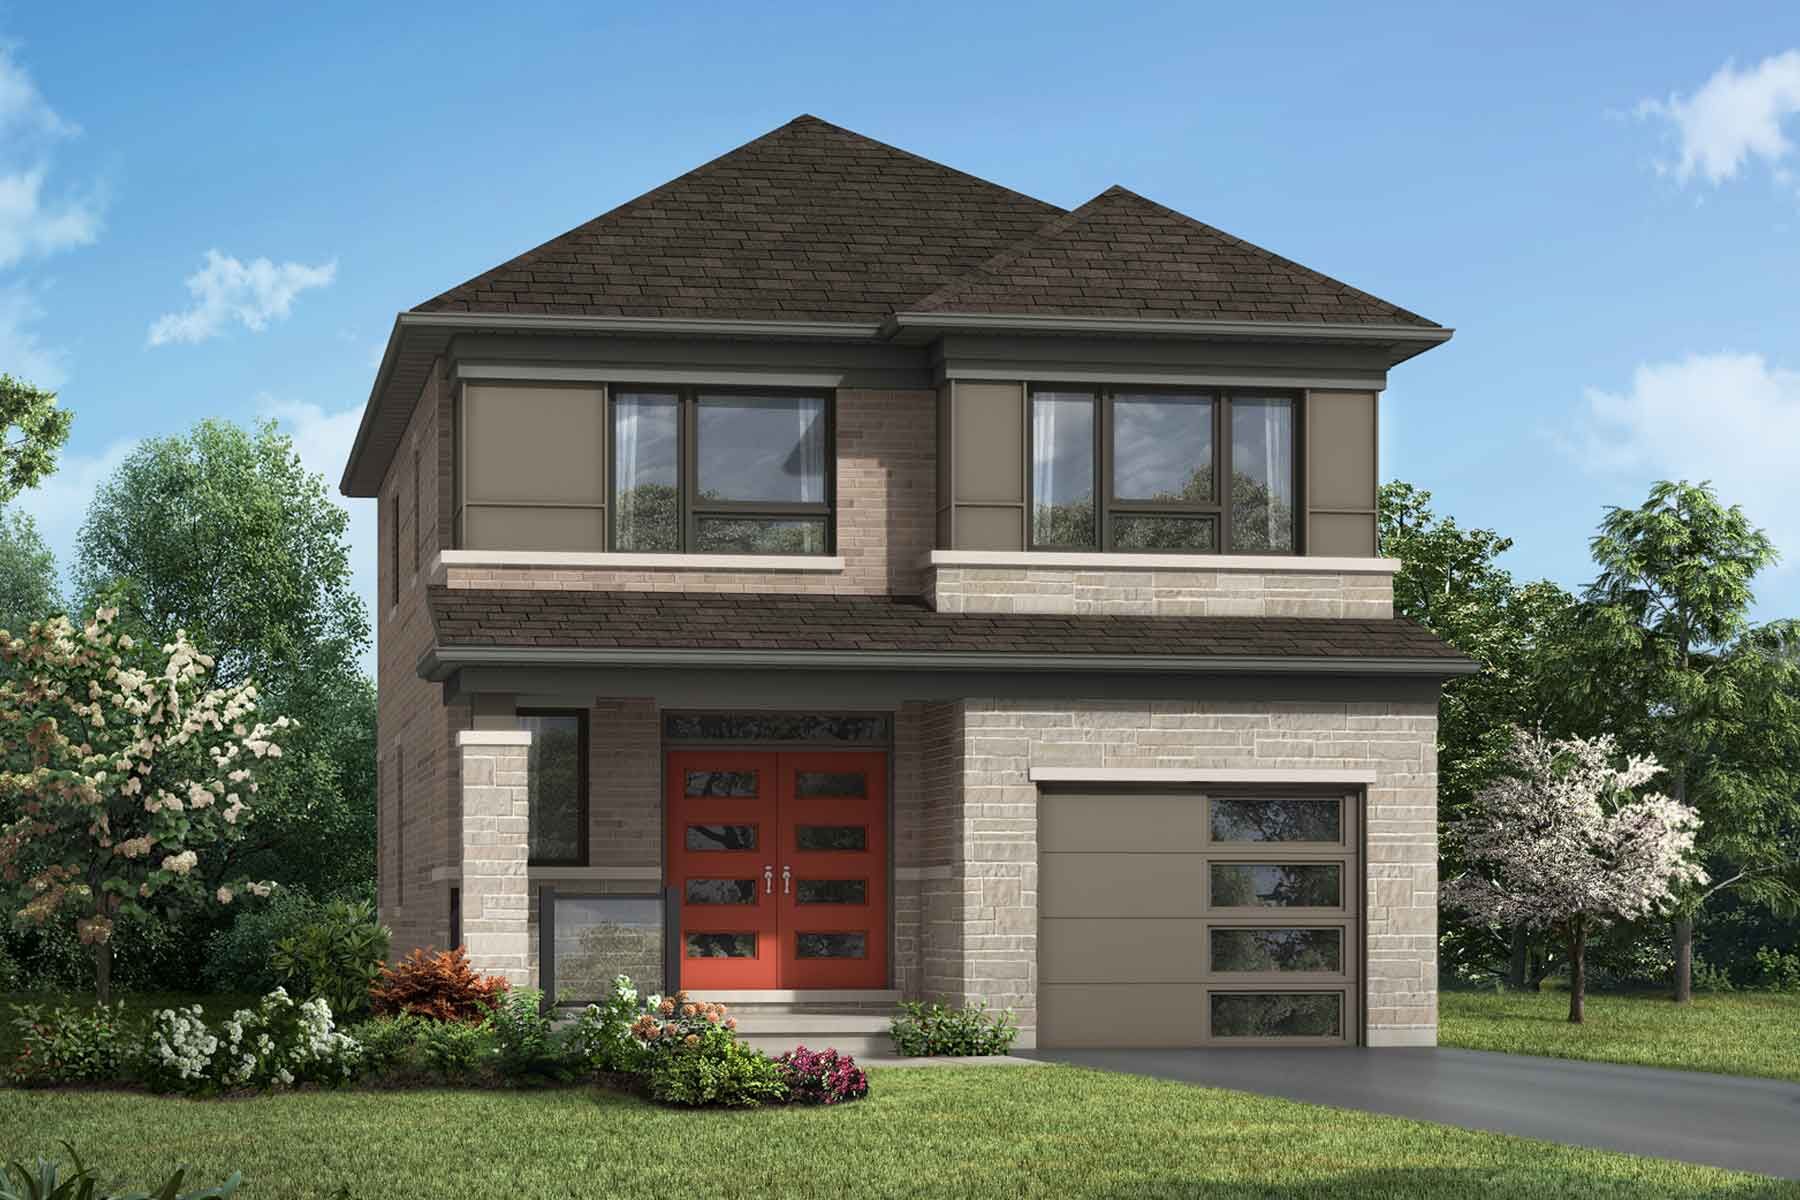  Elevation Front with window, garage and exterior stone